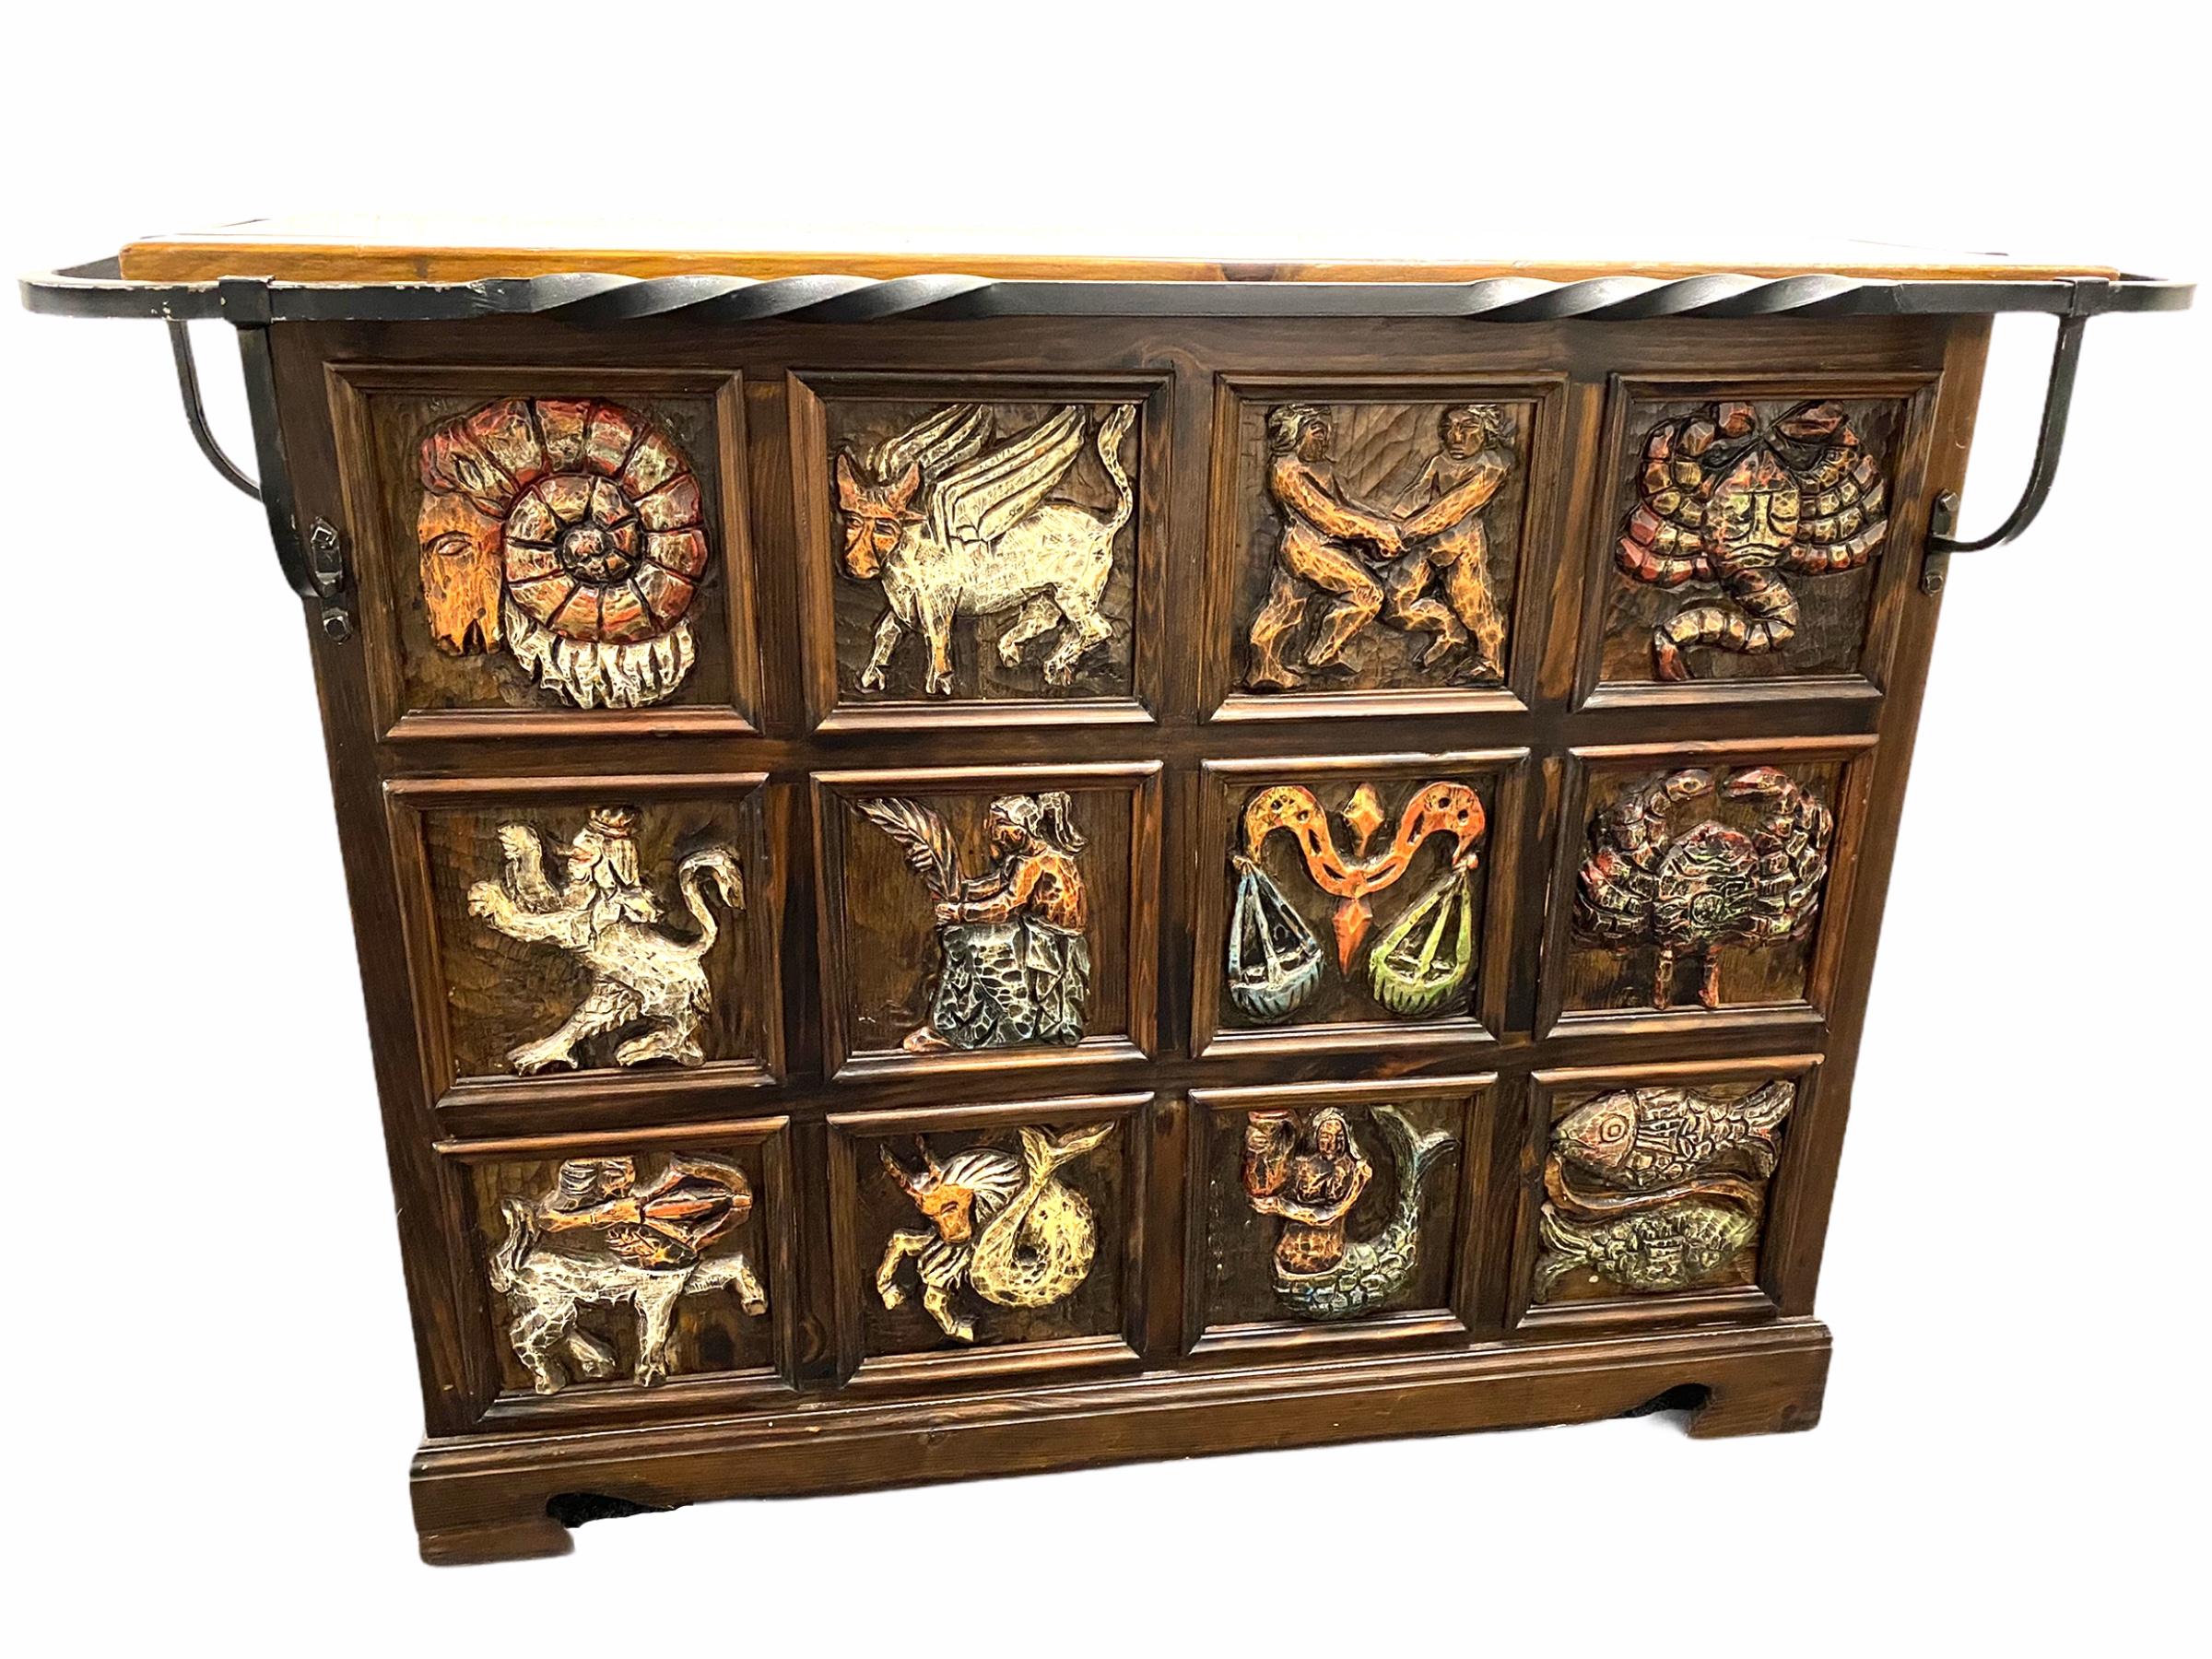 A gorgeous Brutalist dry bar counter, with zodiac signs on the front. Made of wood and metal, Germany, 1970s.
It is in original as found condition with signs of wear as expected with age and use. Obviously this item is not new, so please check all